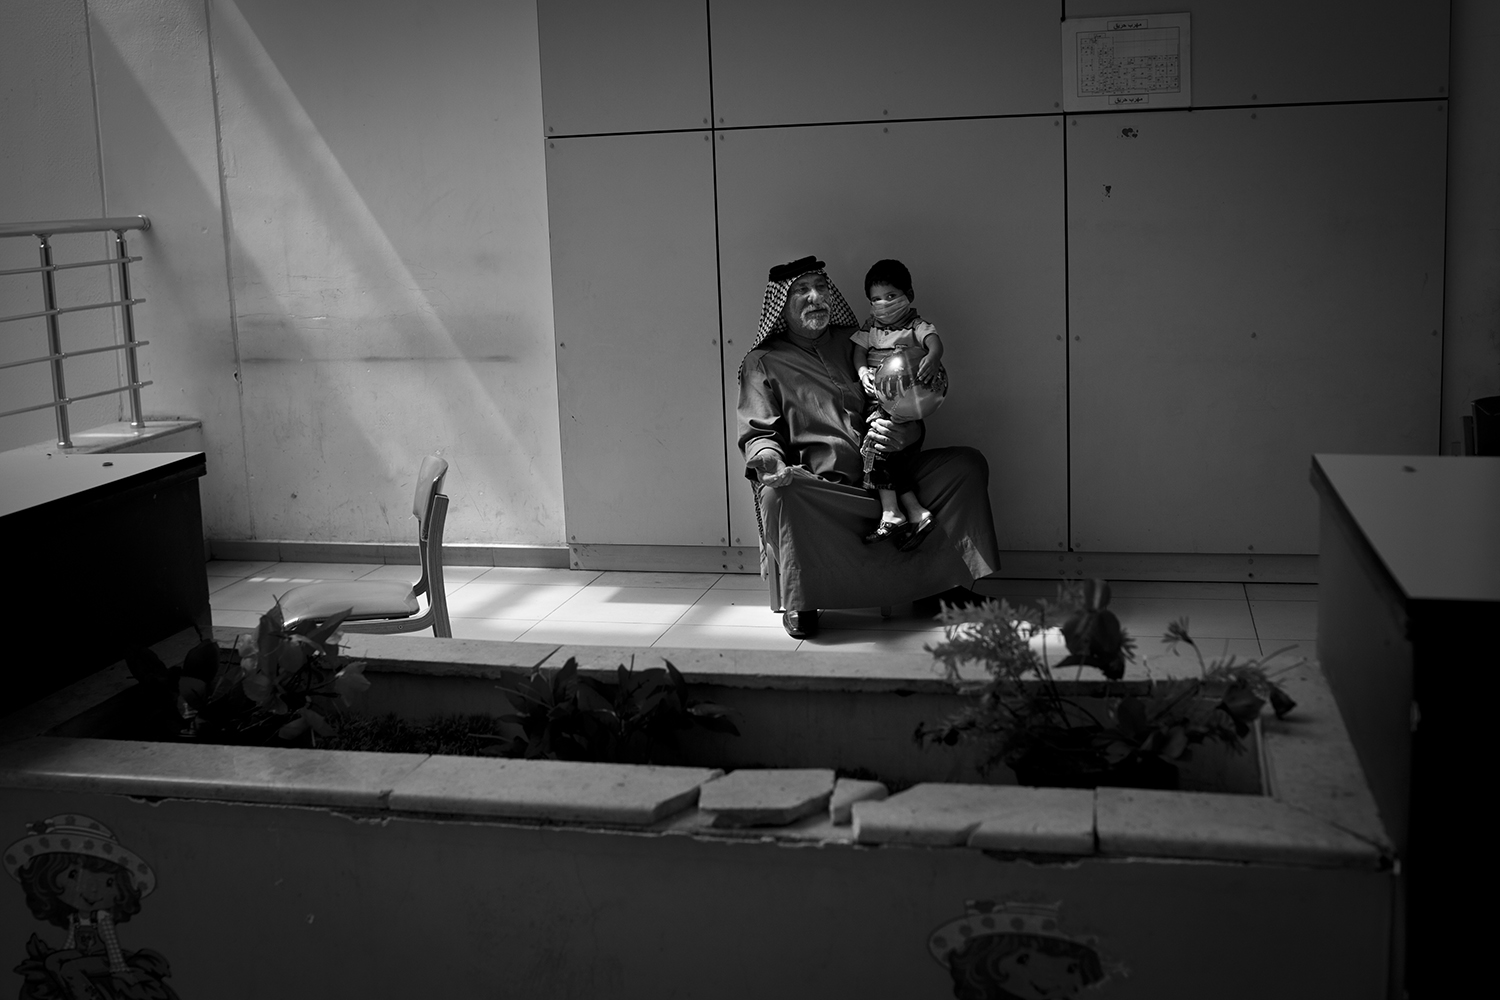 Apr. 23, 2012. Basra. An old man prays for his grandson, who suffers from leukemia, inside the Children's Hospital.